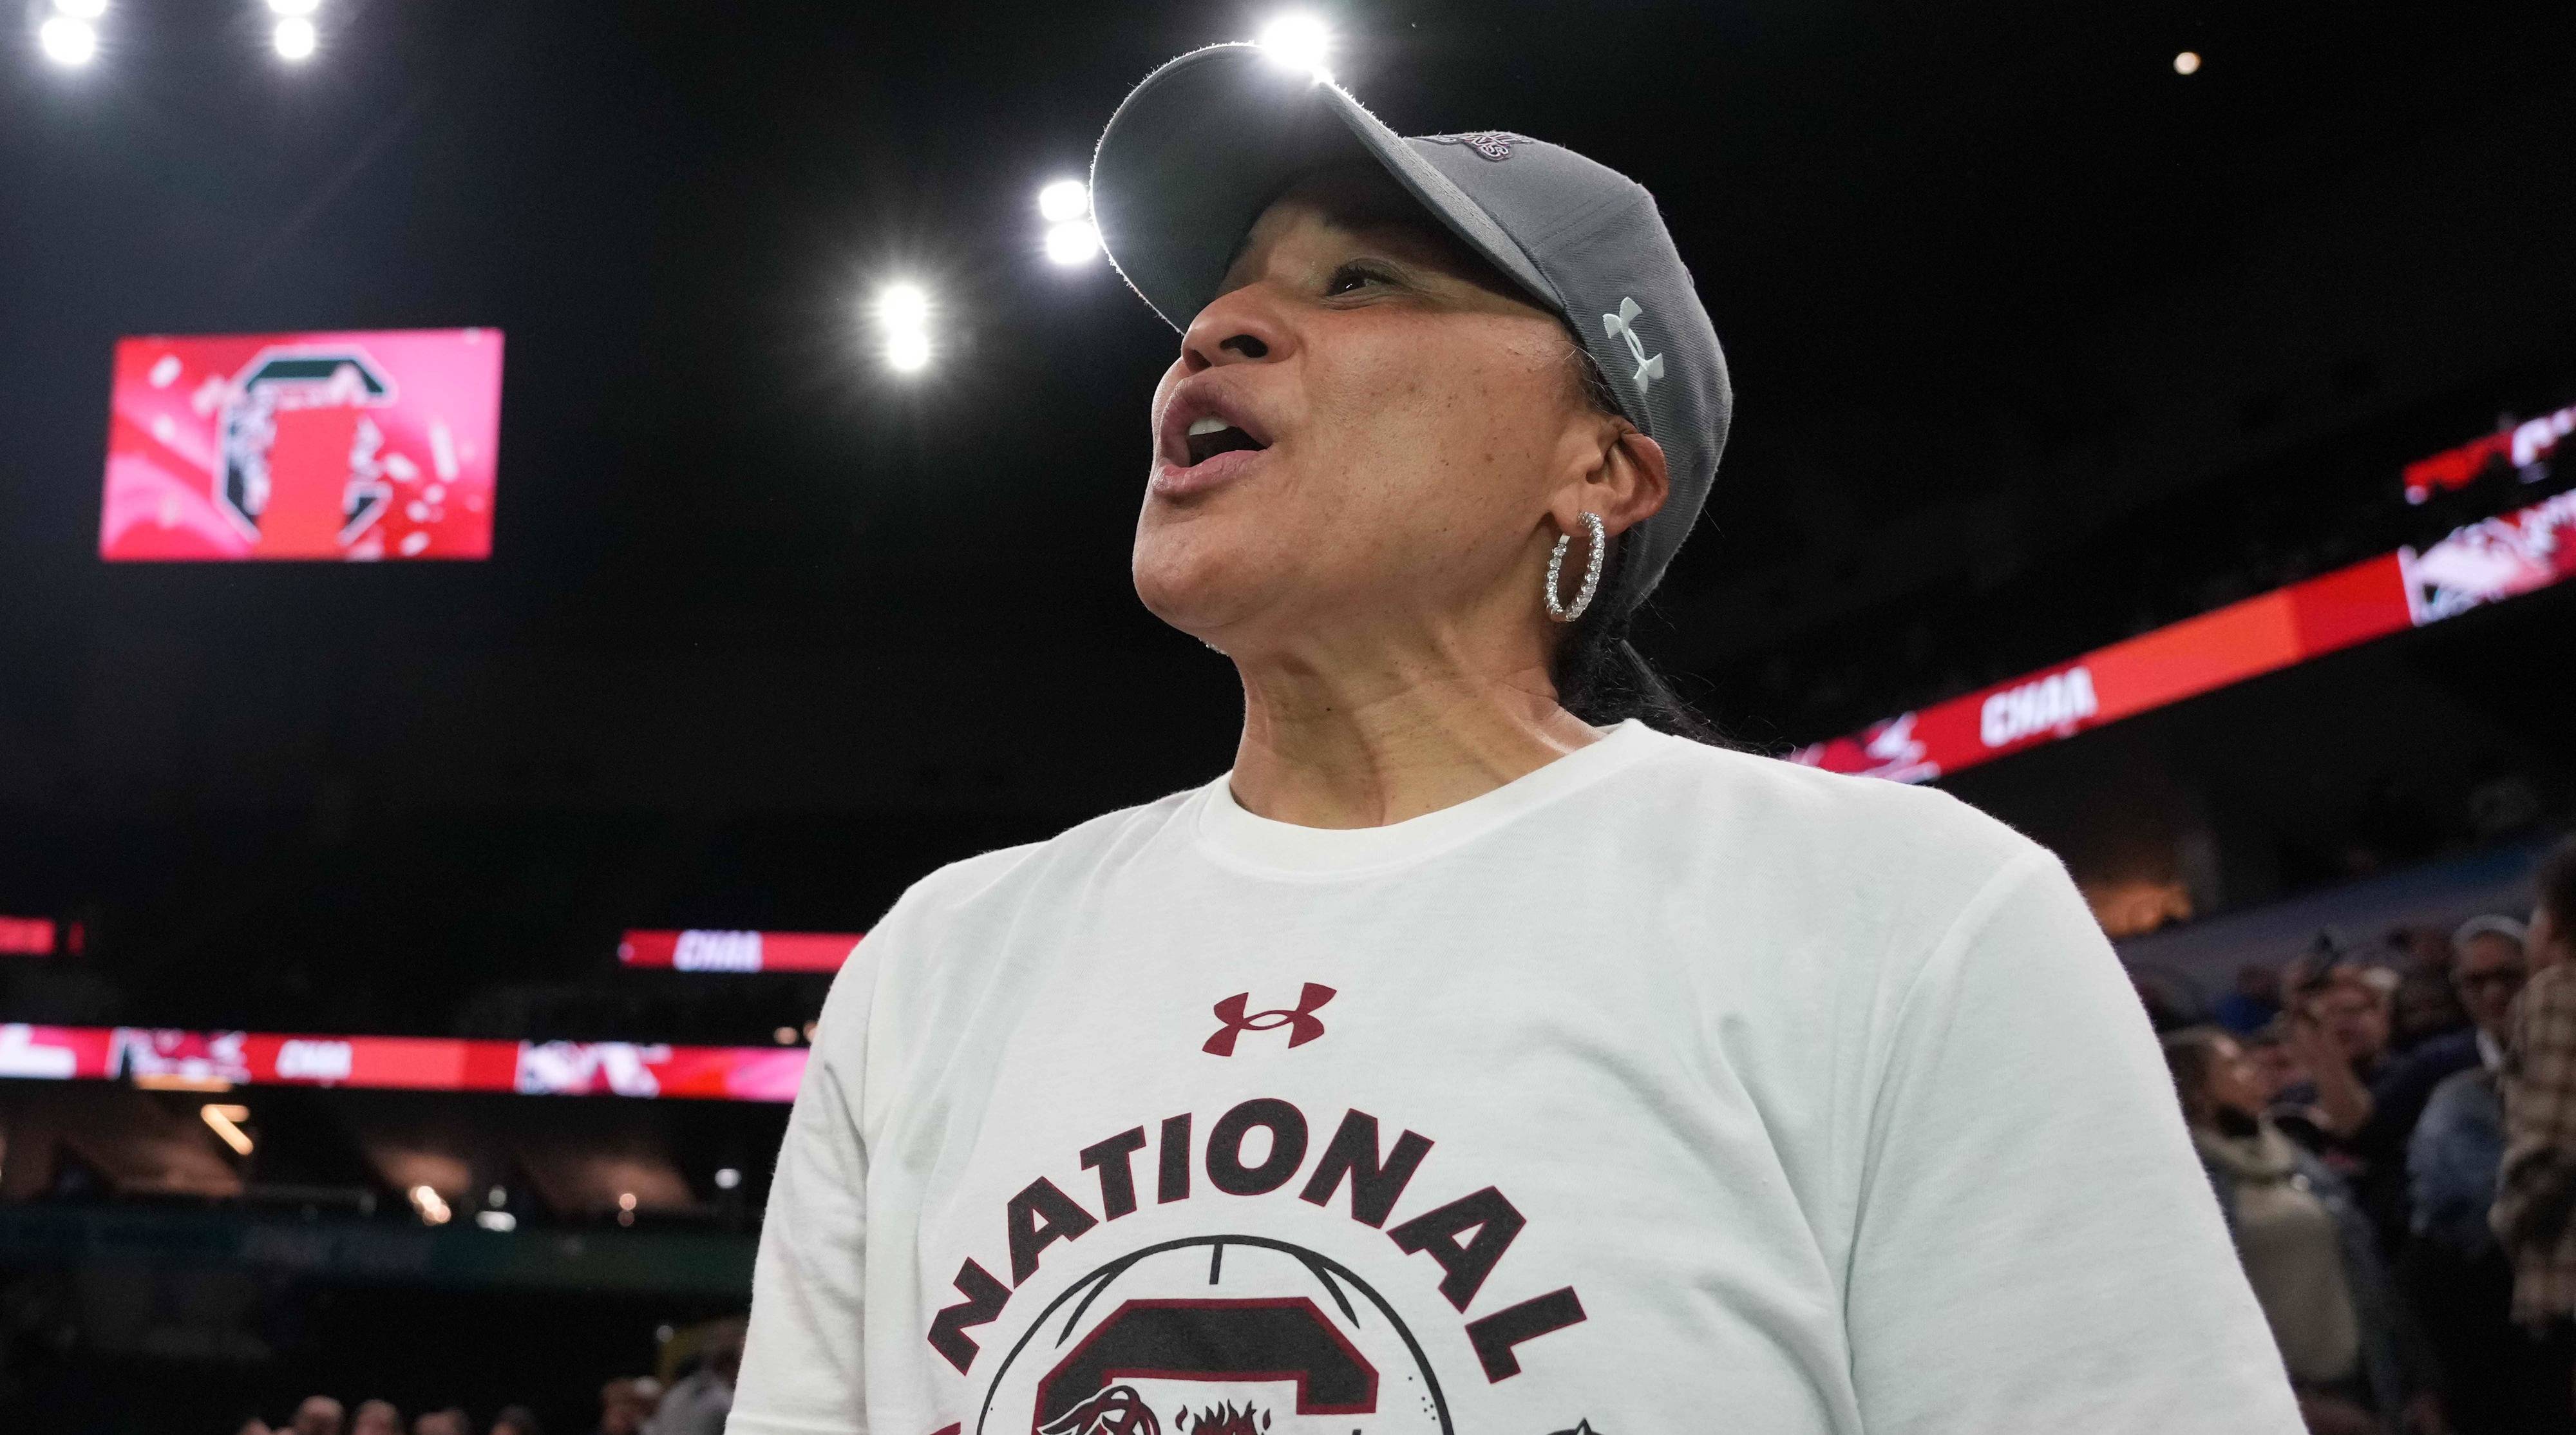 Dawn Staley Celebrates on Sideline After Big South Carolina Touchdown -  Sports Illustrated